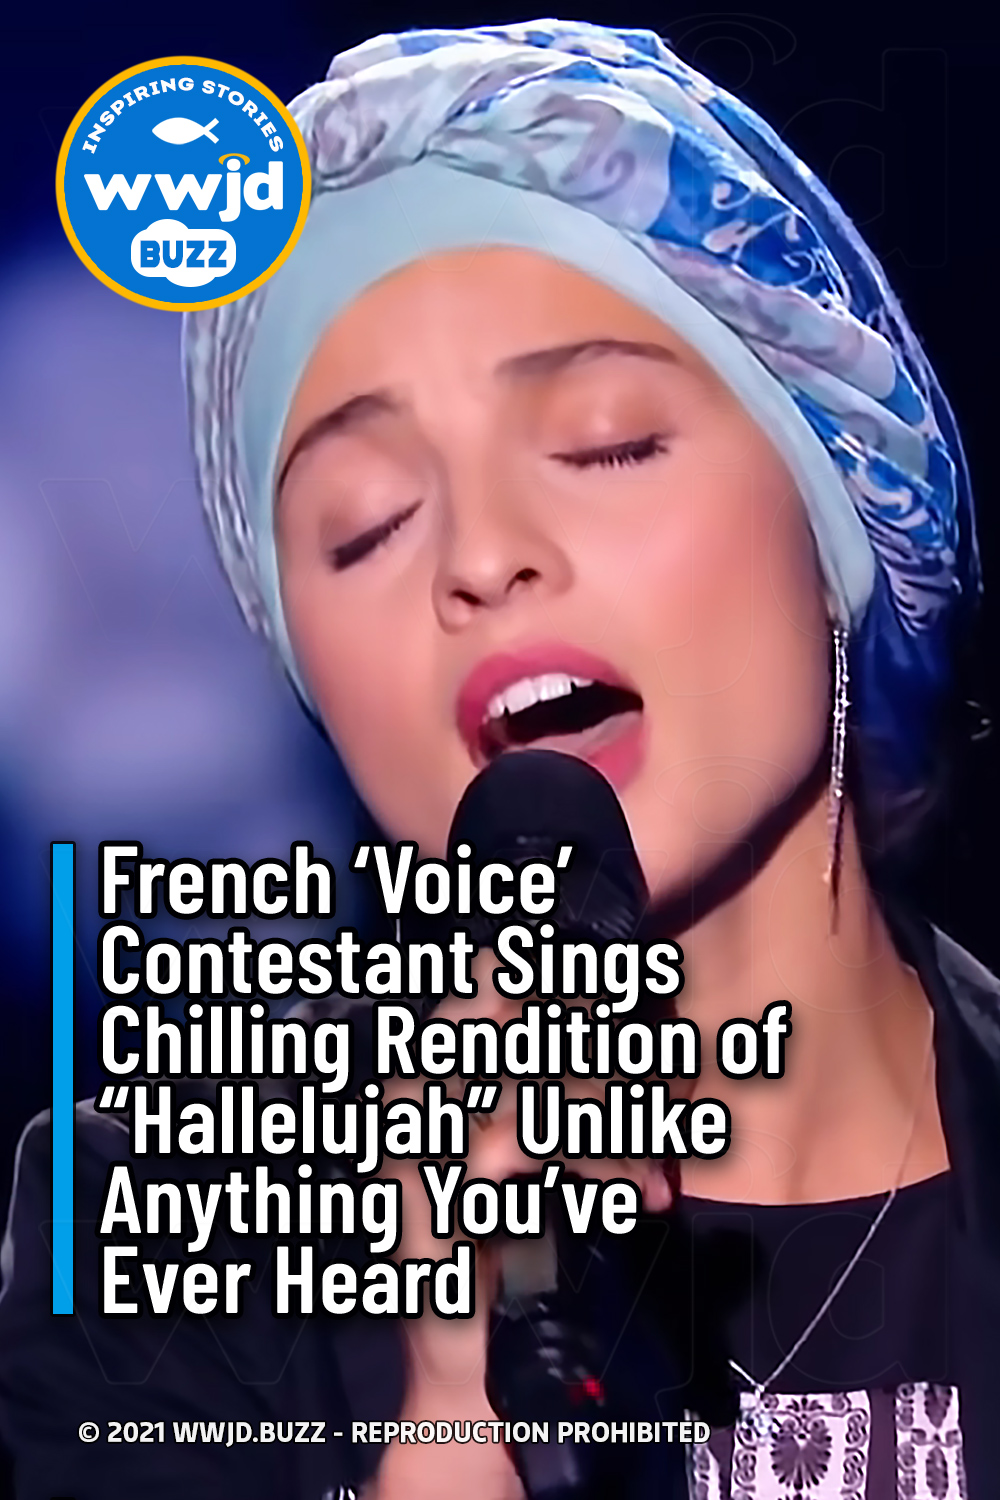 French \'Voice\' Contestant Sings Chilling Rendition of “Hallelujah” Unlike Anything You\'ve Ever Heard